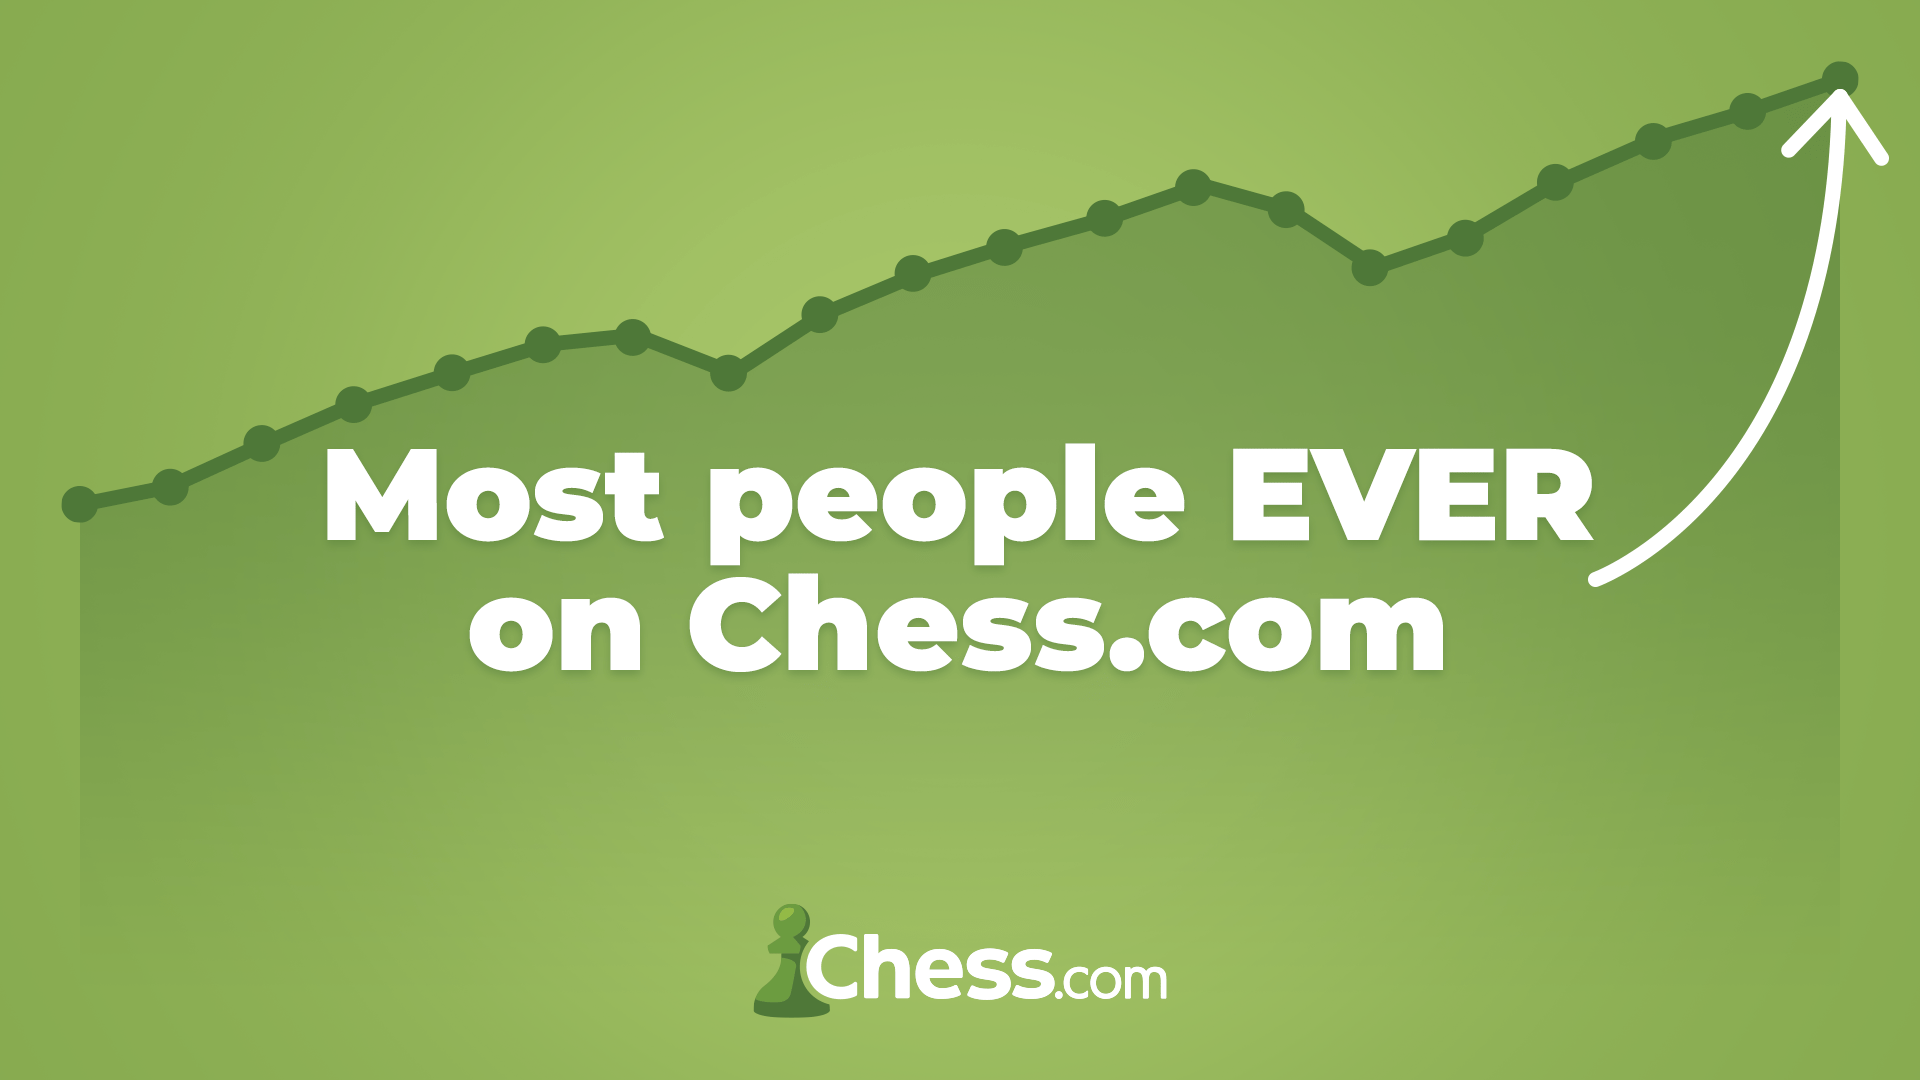 On December 31, we had seven million active members on Chess.com in a single day for the first time. On January 20, we had ten million active members.